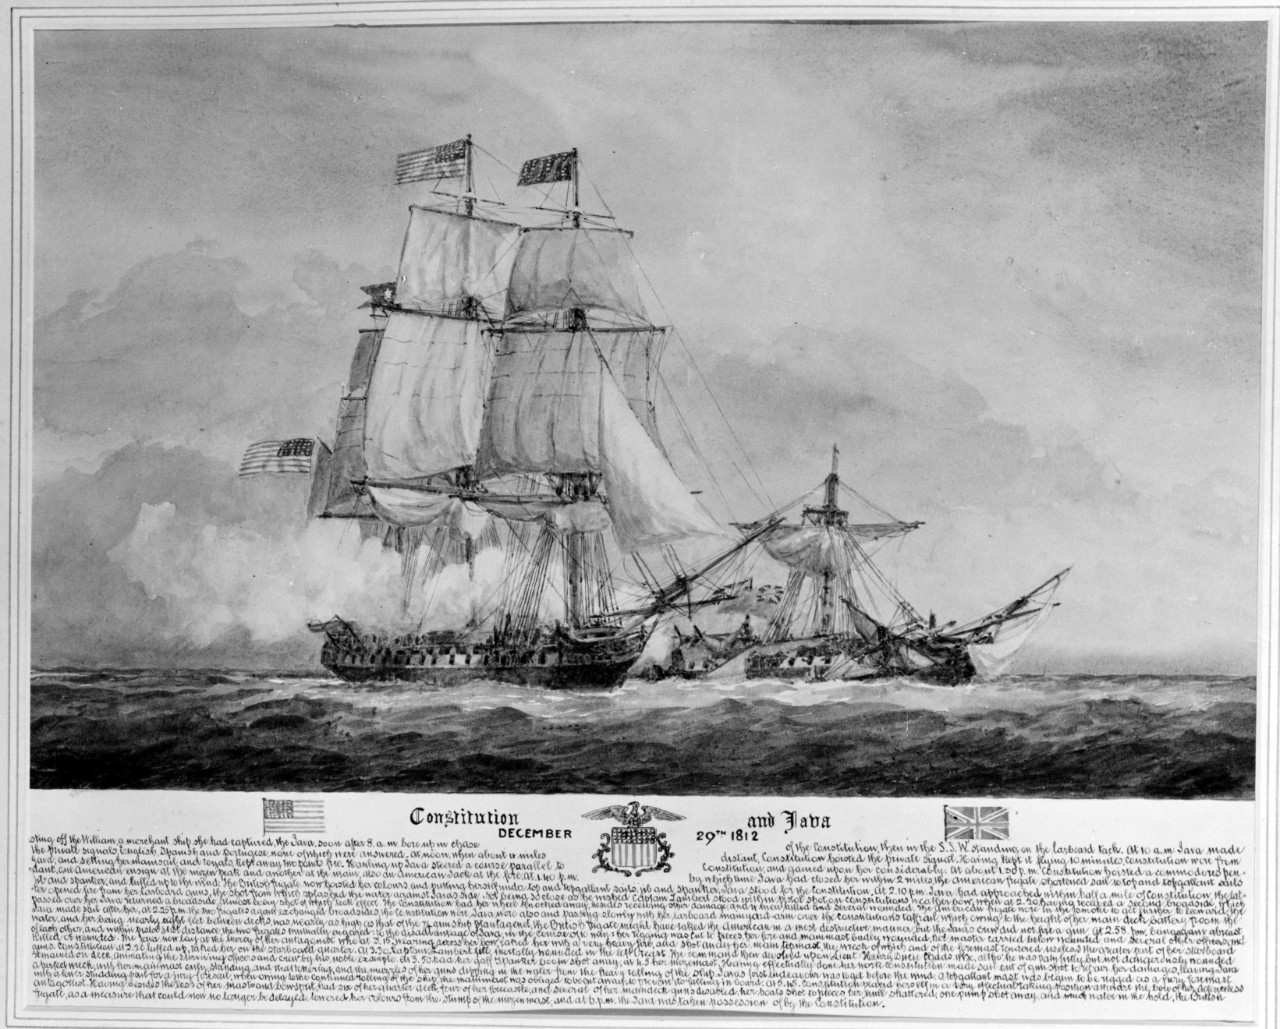 Photo #: NH 55412  U.S. Frigate Constitution engaging HMS Java, off the coast of Brazil, 29 December 1812